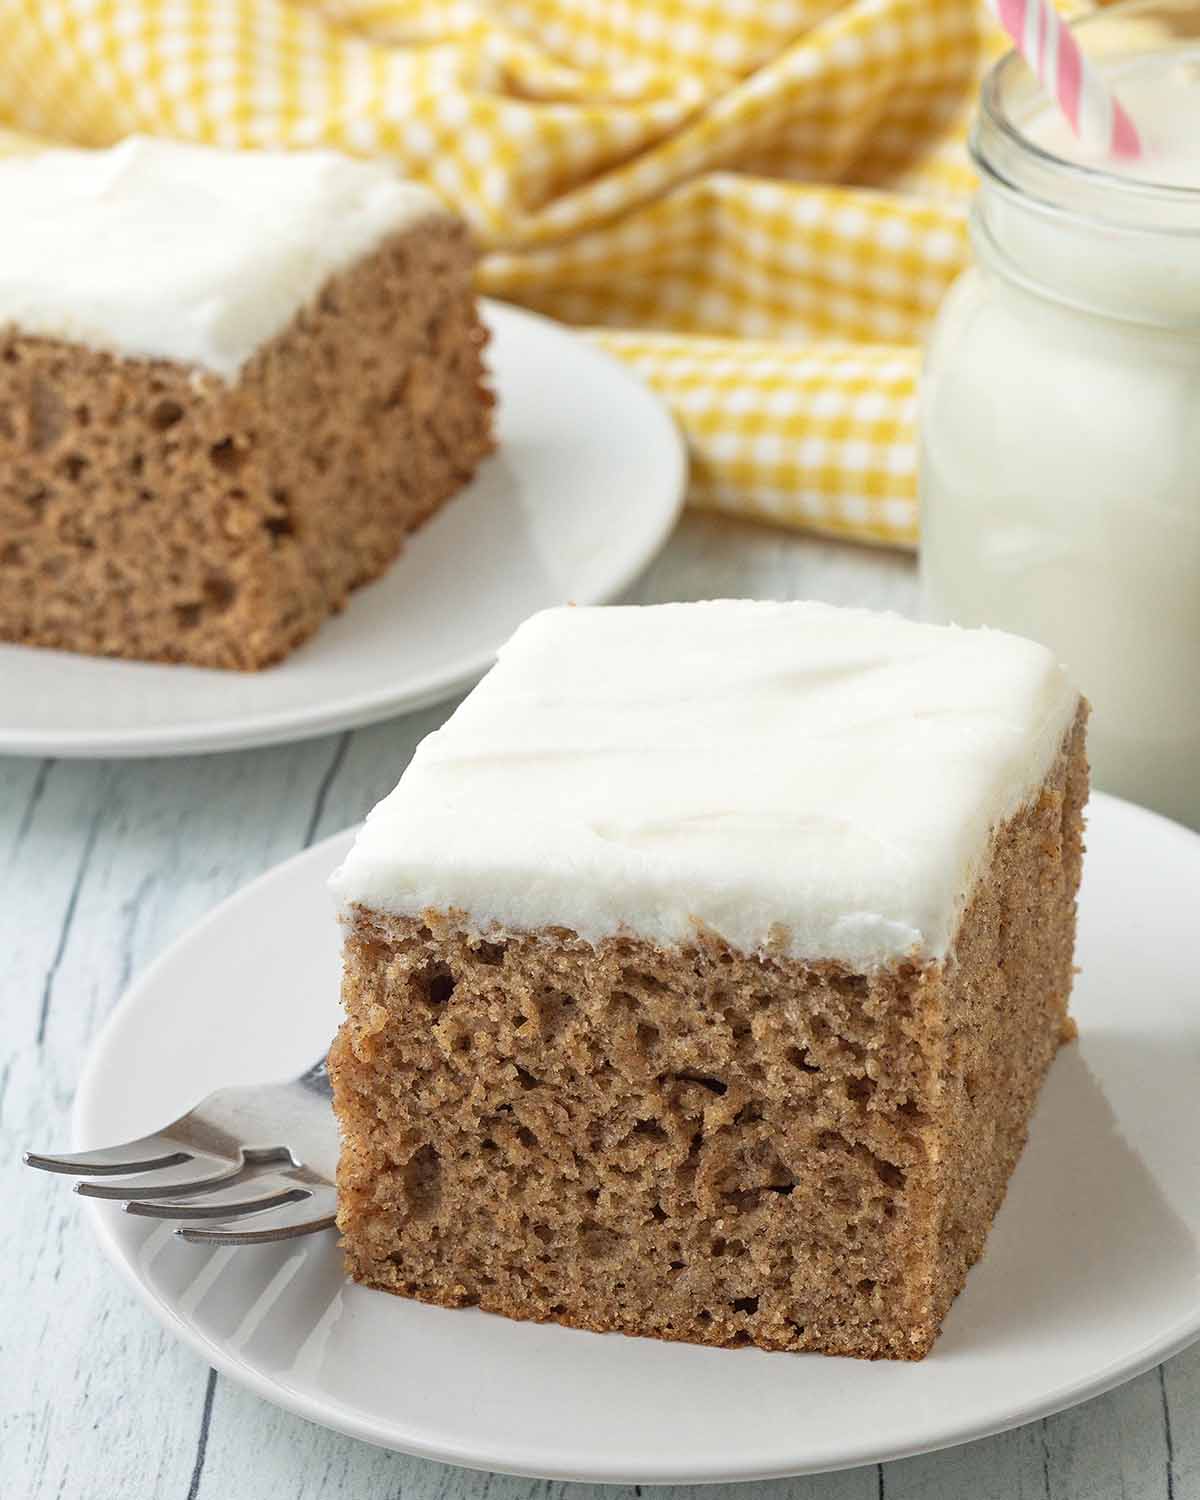 A square piece of banana cake with frosting sitting on a small white plate with a fork on the side.